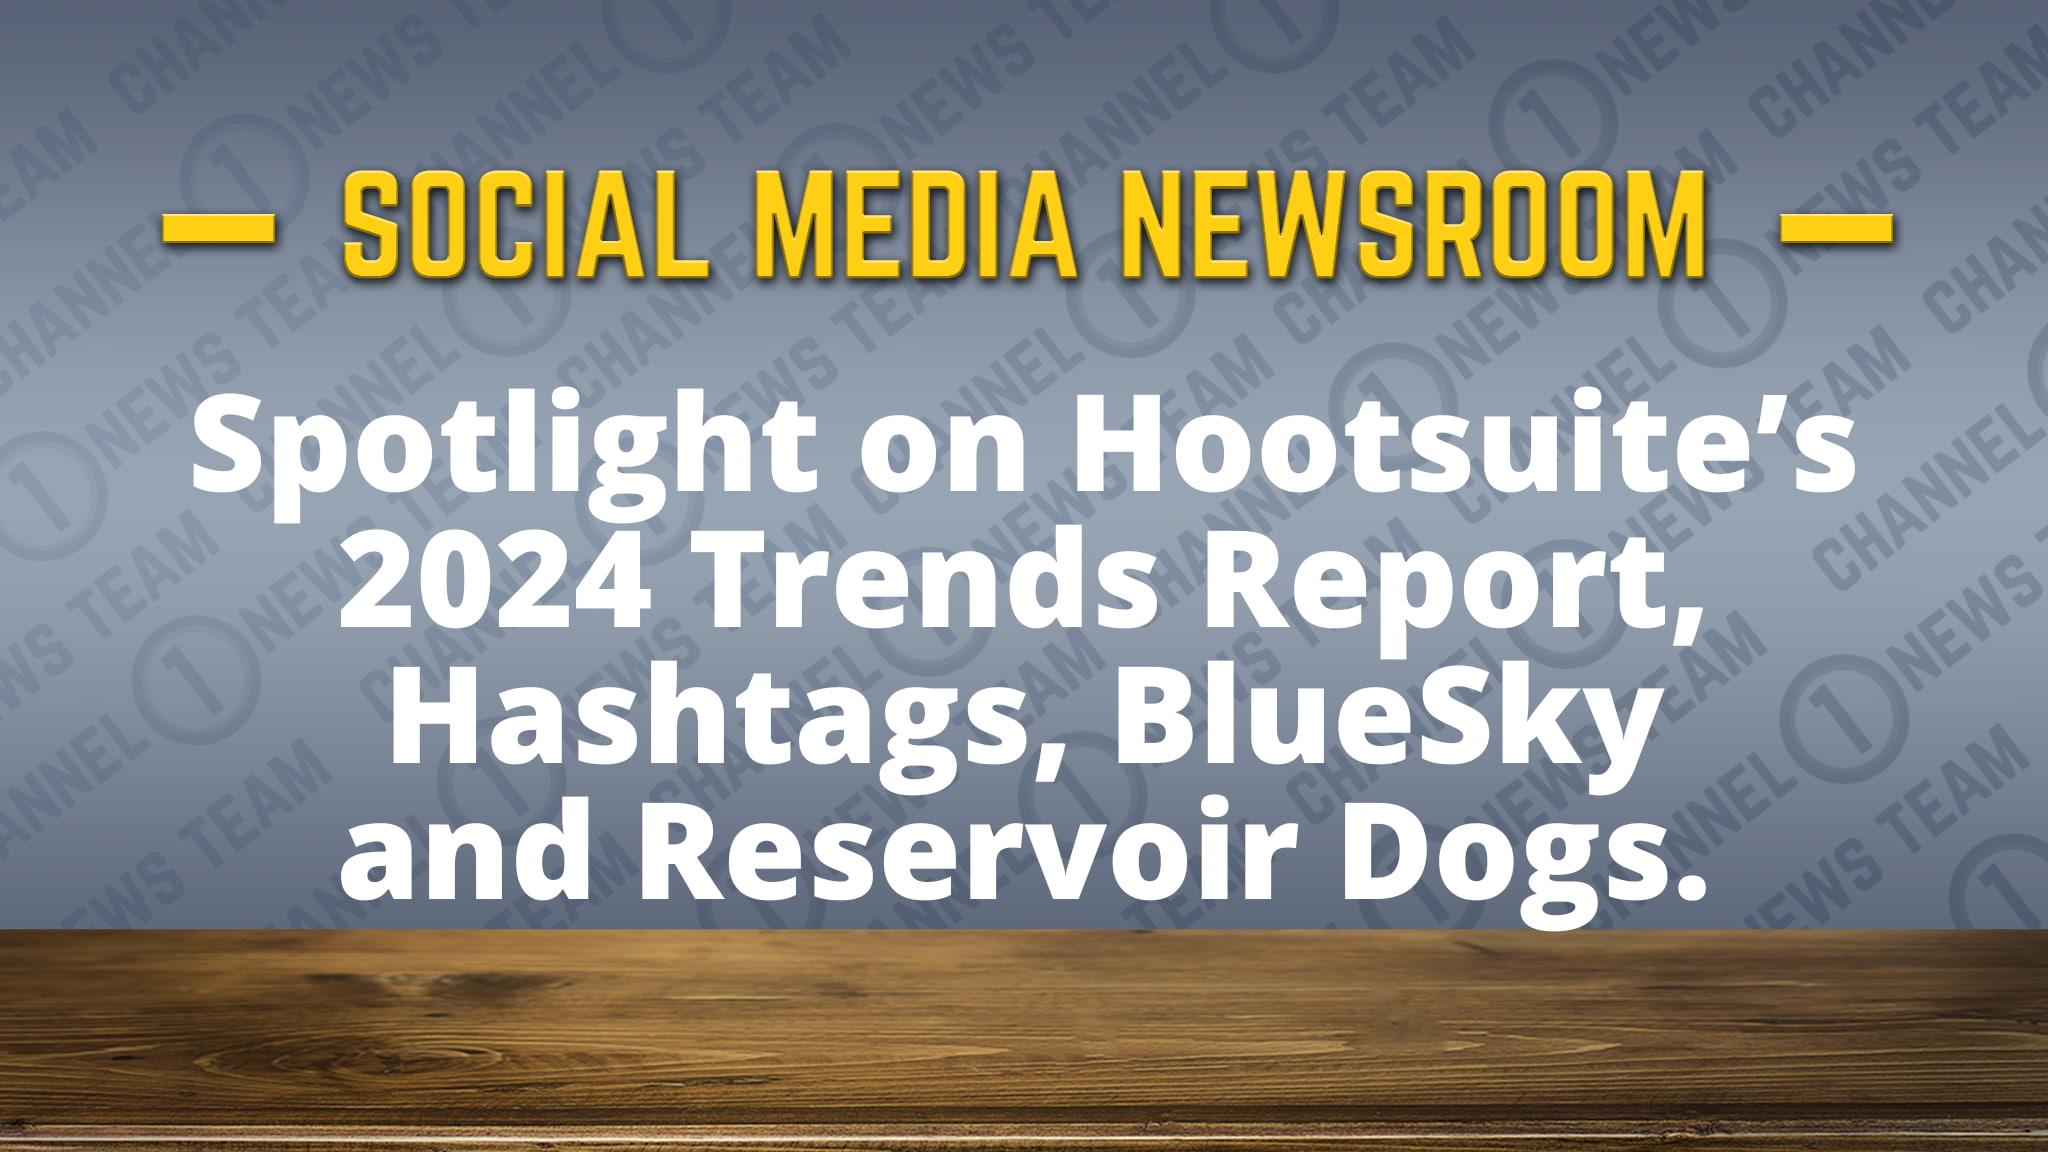 Spotlight on the 2024 Trends Report from Hootsuite, Hashtags, BlueSky and ‘Reservoir Dogs’ – SMN [Video]